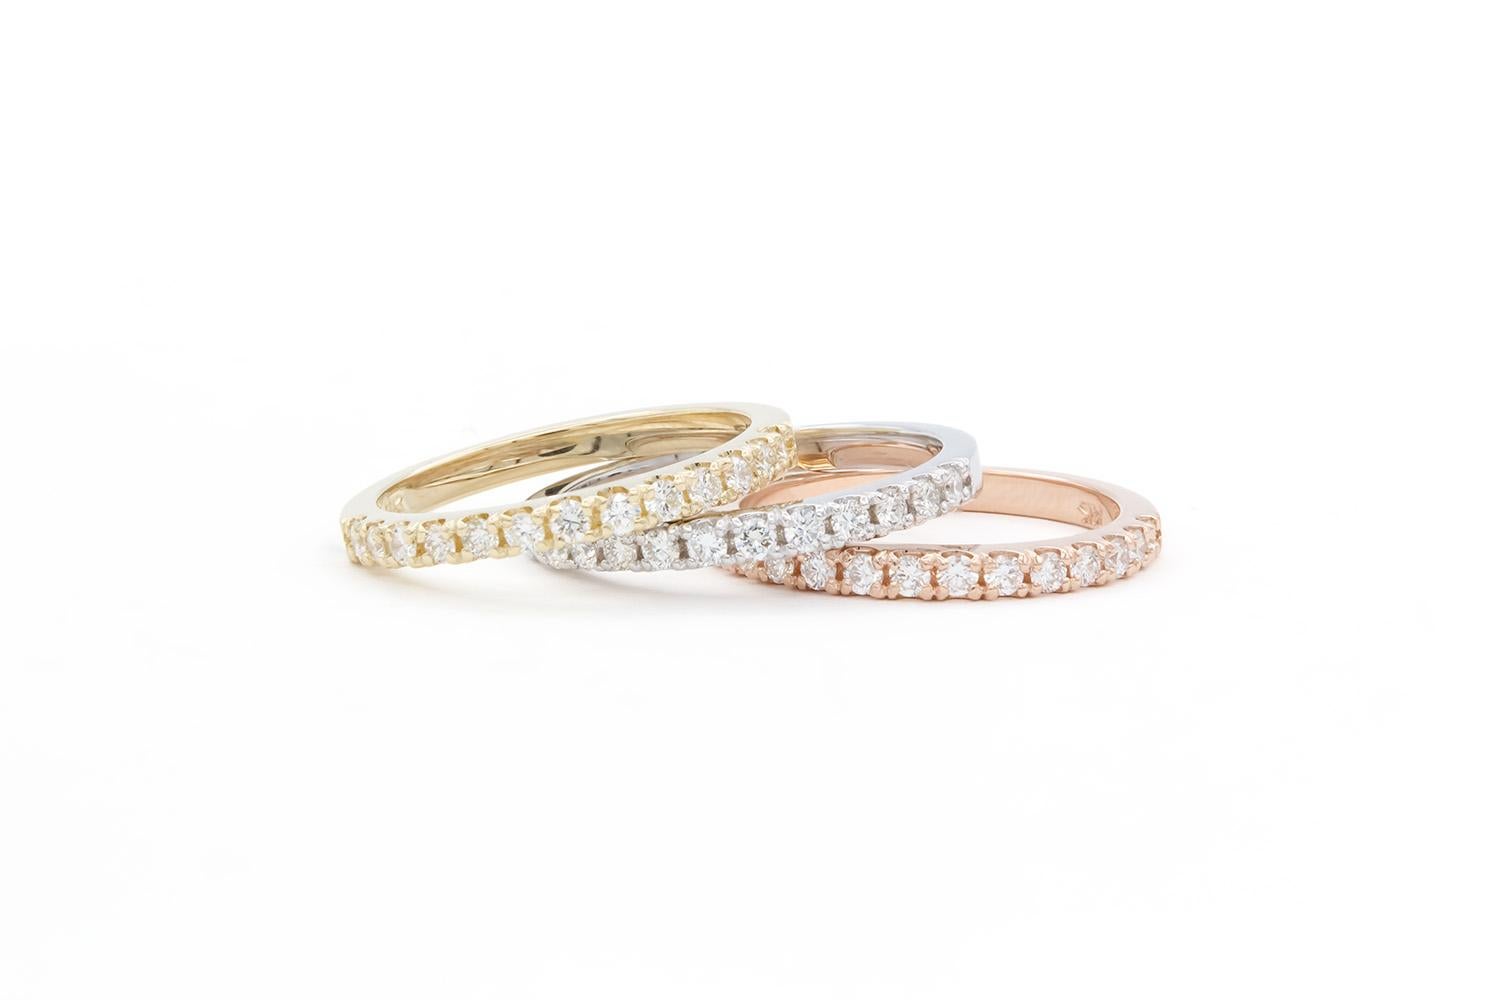 We are pleased to offer these Brand New 14k White Yellow & Rose Gold U Pave Diamond Stacking Fashion Rings. They feature 0.80ctw F-G/VS round brilliant cut diamonds set in these 14k gold stacking rings. They are size 6 US and measures 2mm wide. The